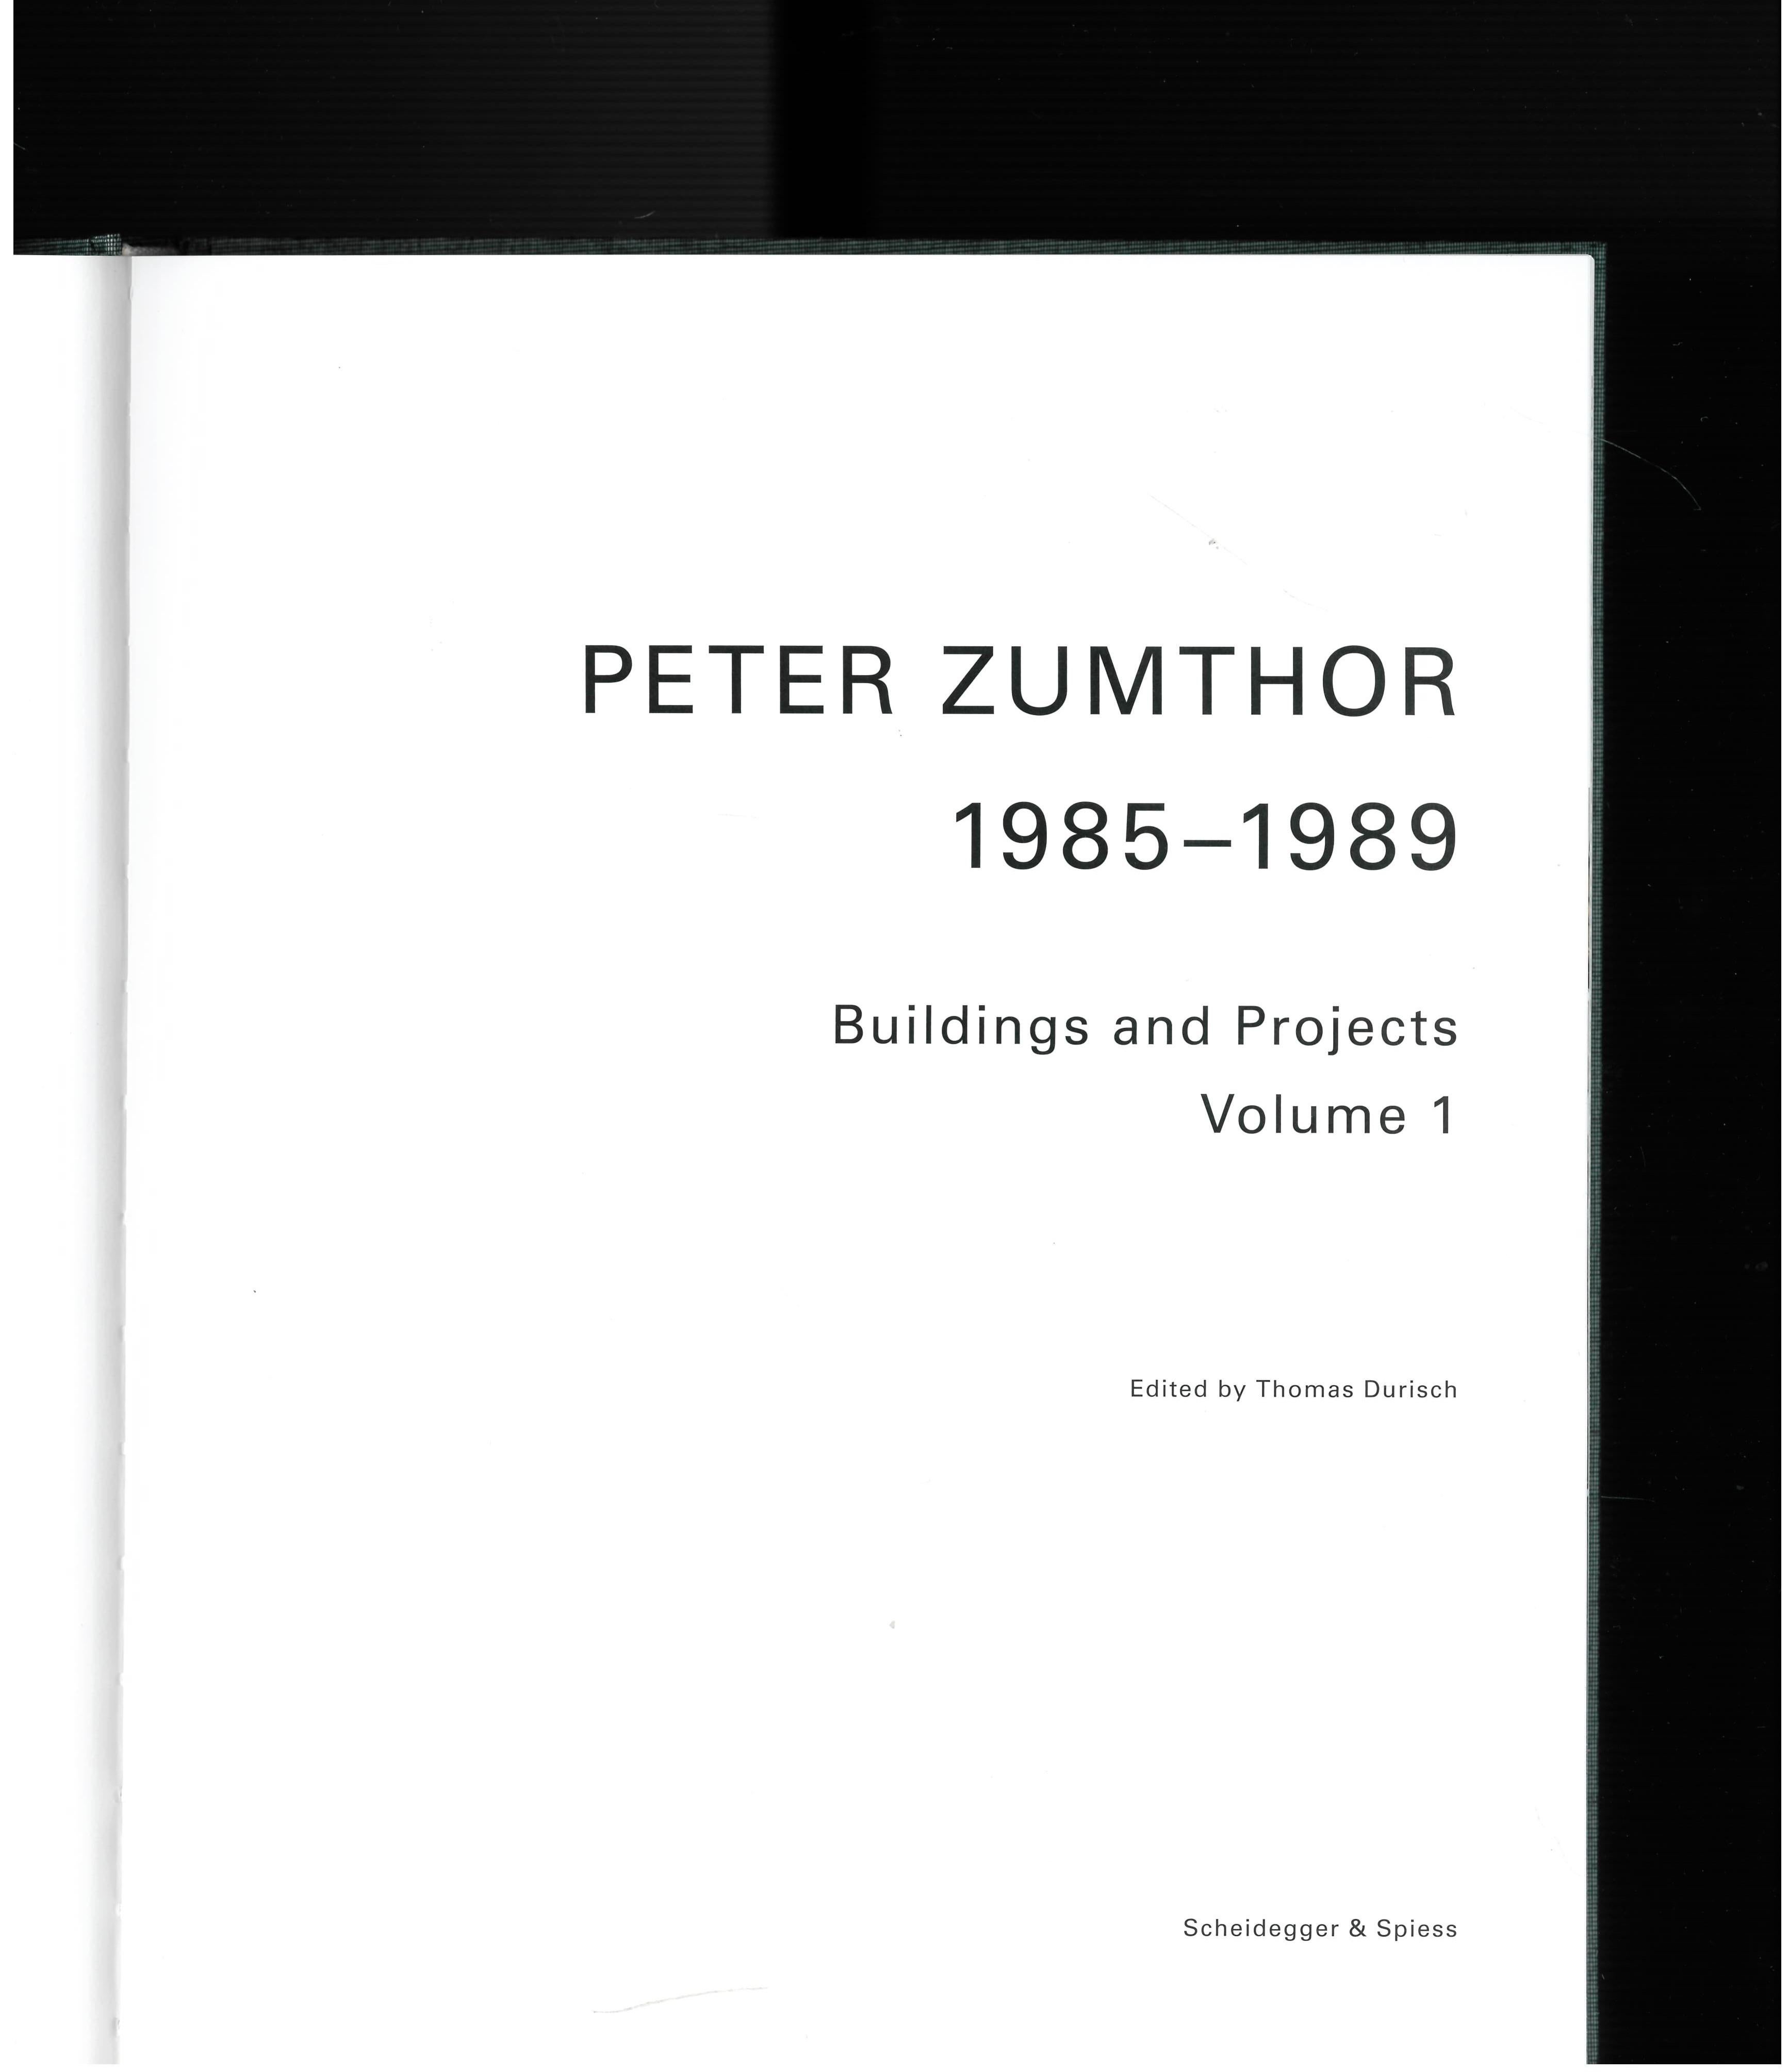 peter zumthor buildings and projects